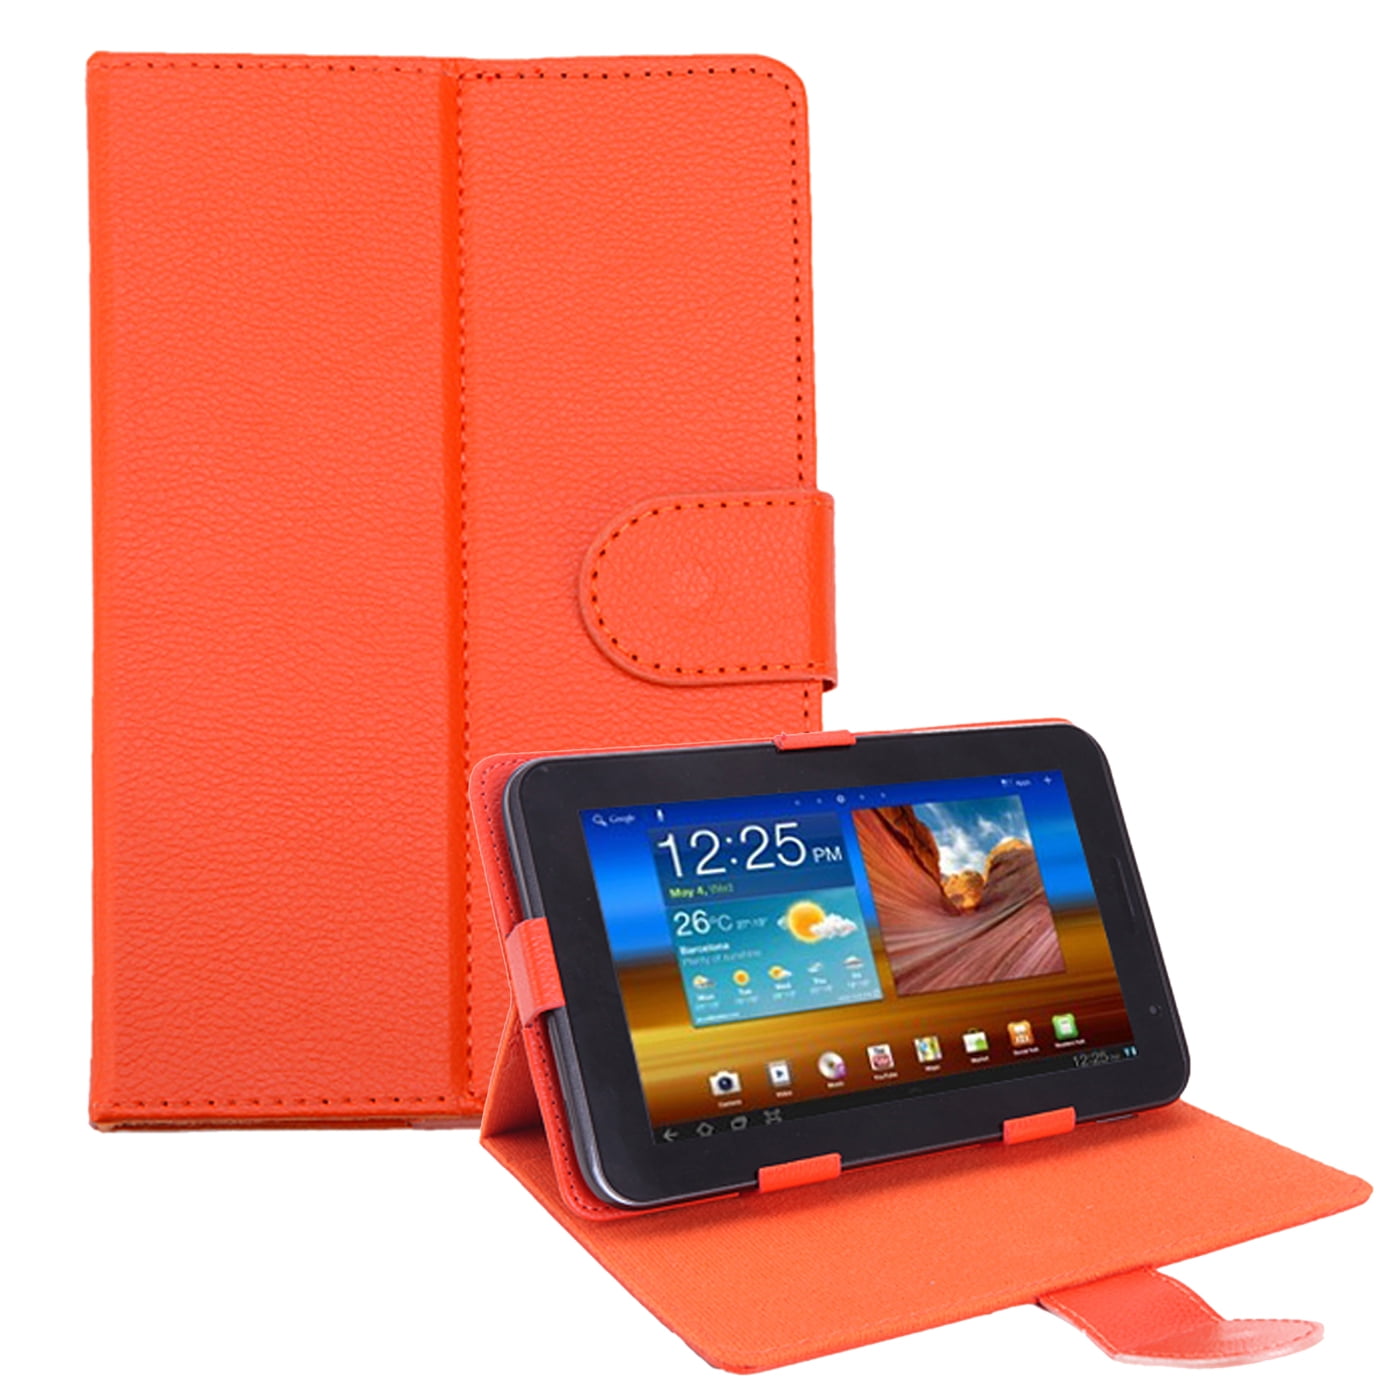 7 in rca voyager tablet case